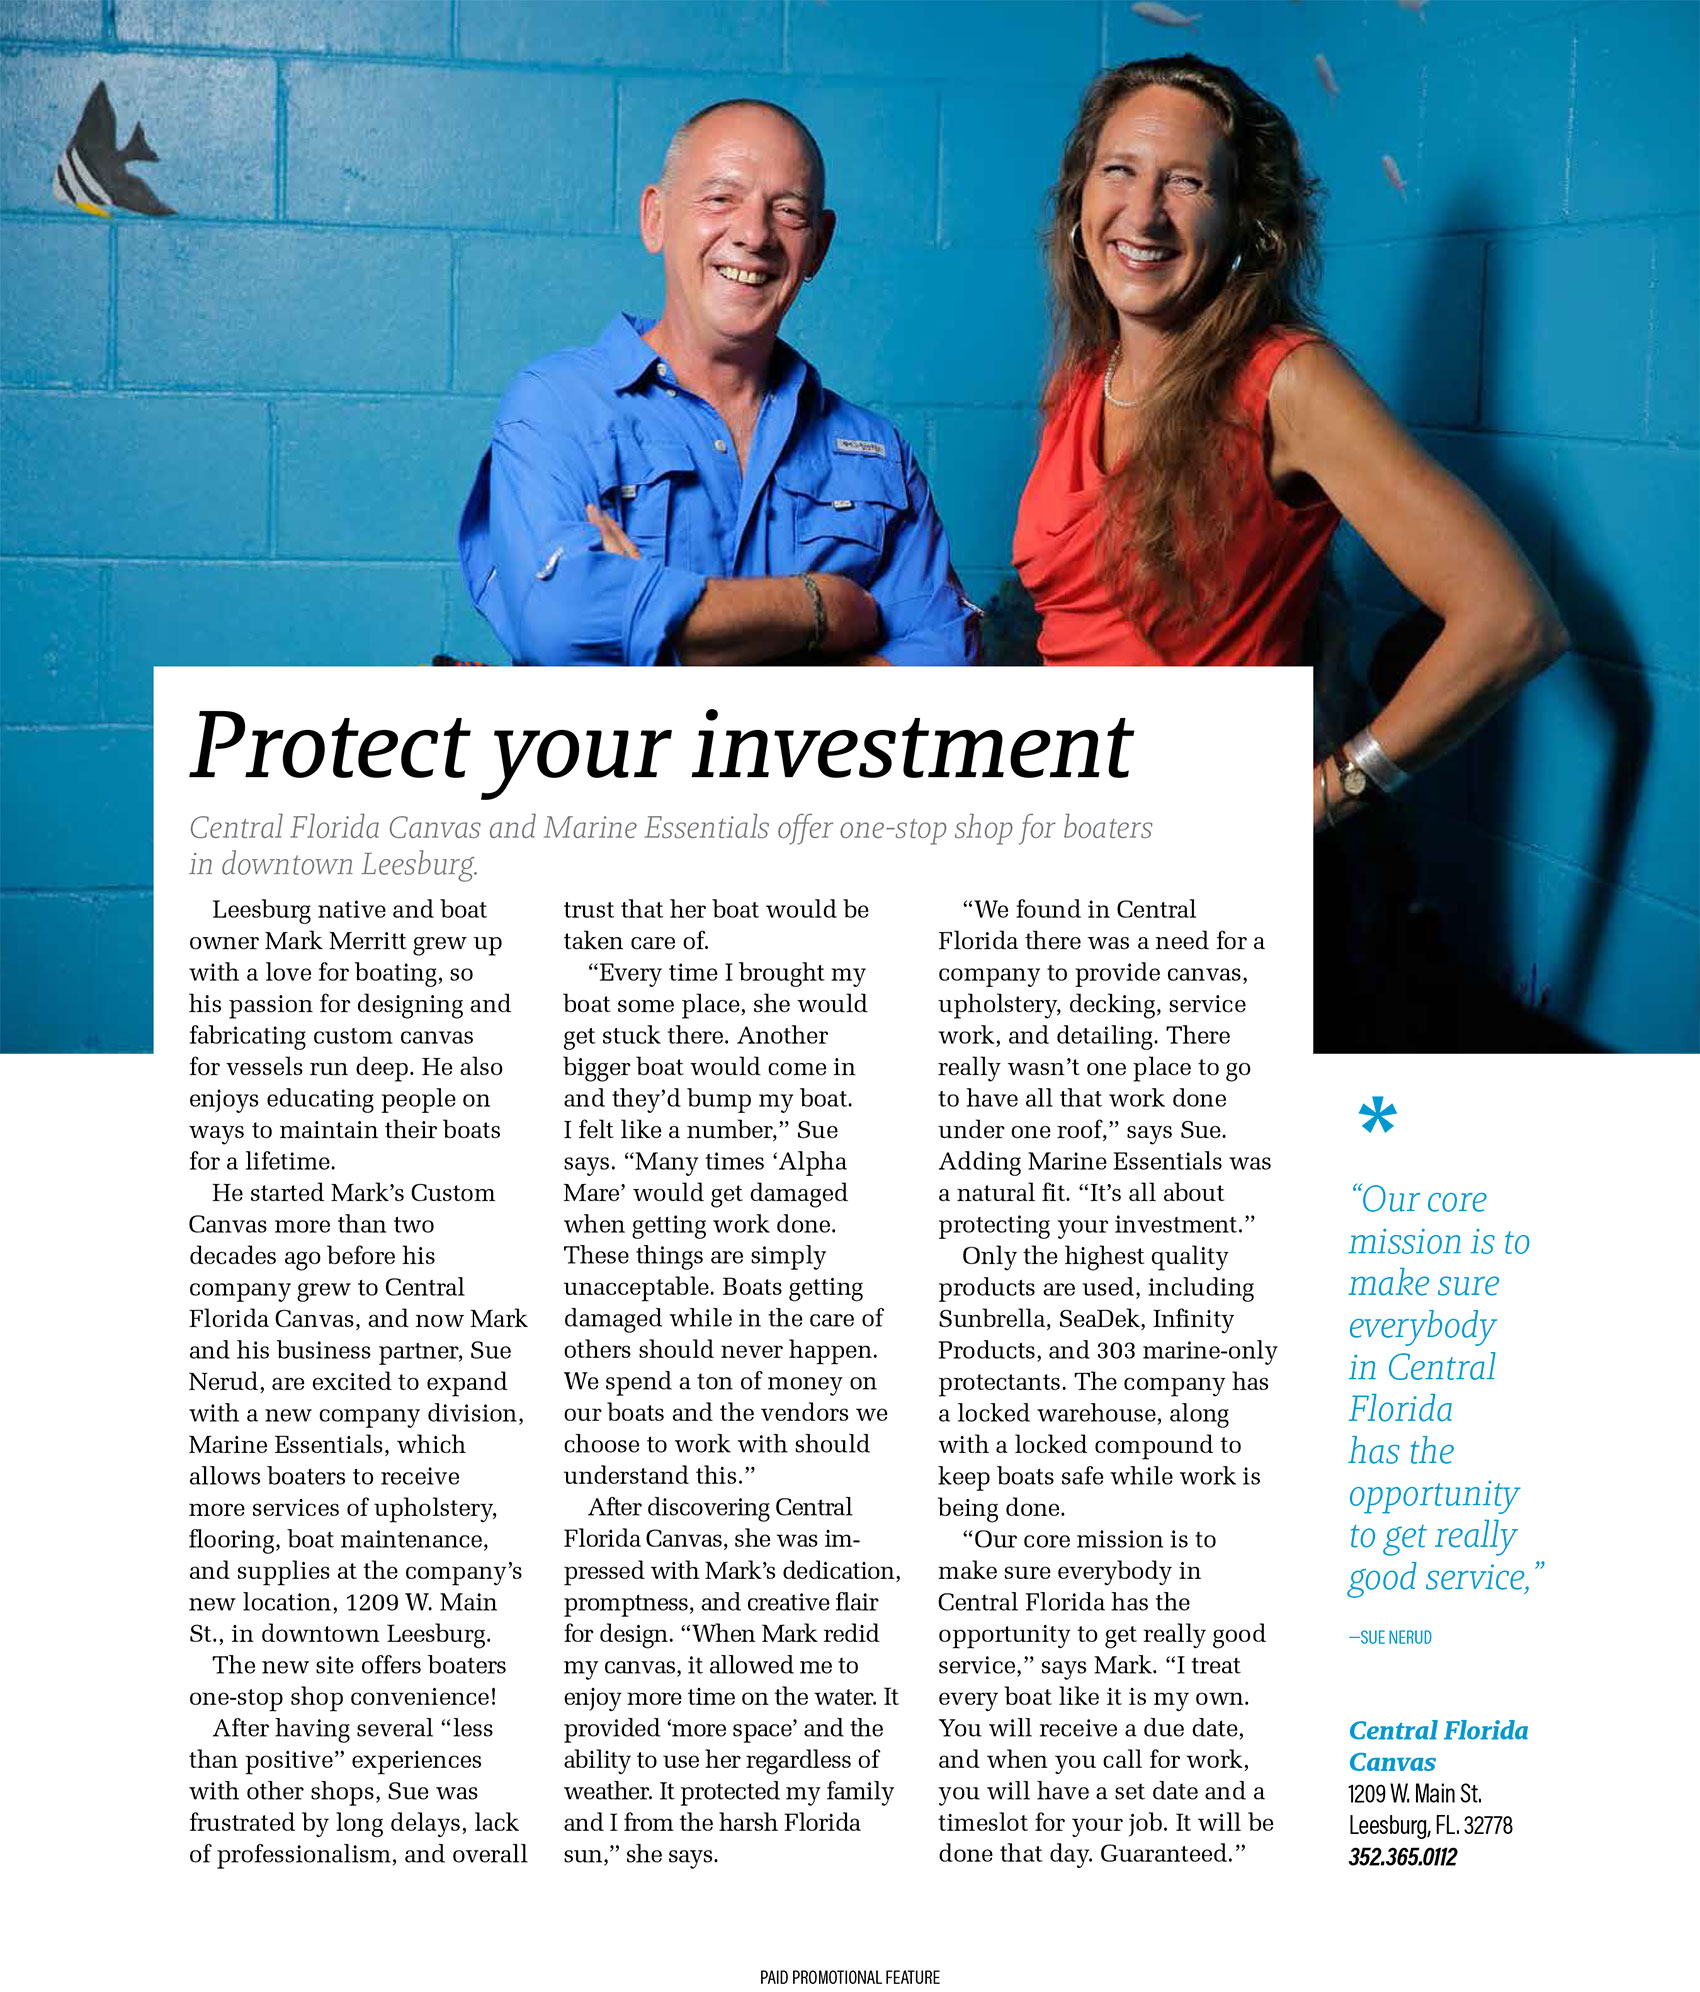 protect-your-investment